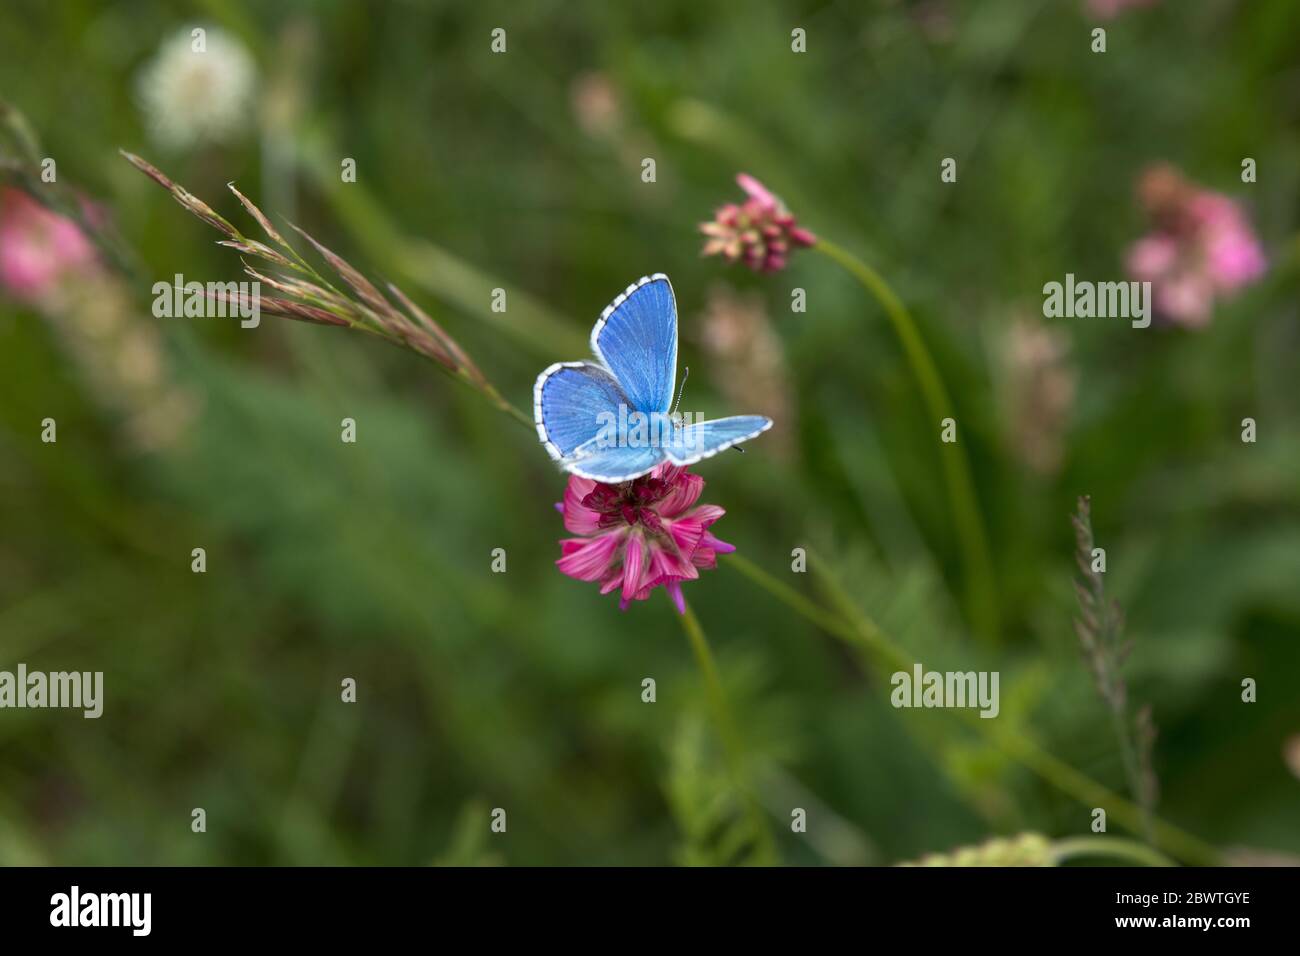 The blue butterfly Lycaenidae family flying among pink cosmos flowers with blurred flowers and green background Stock Photo